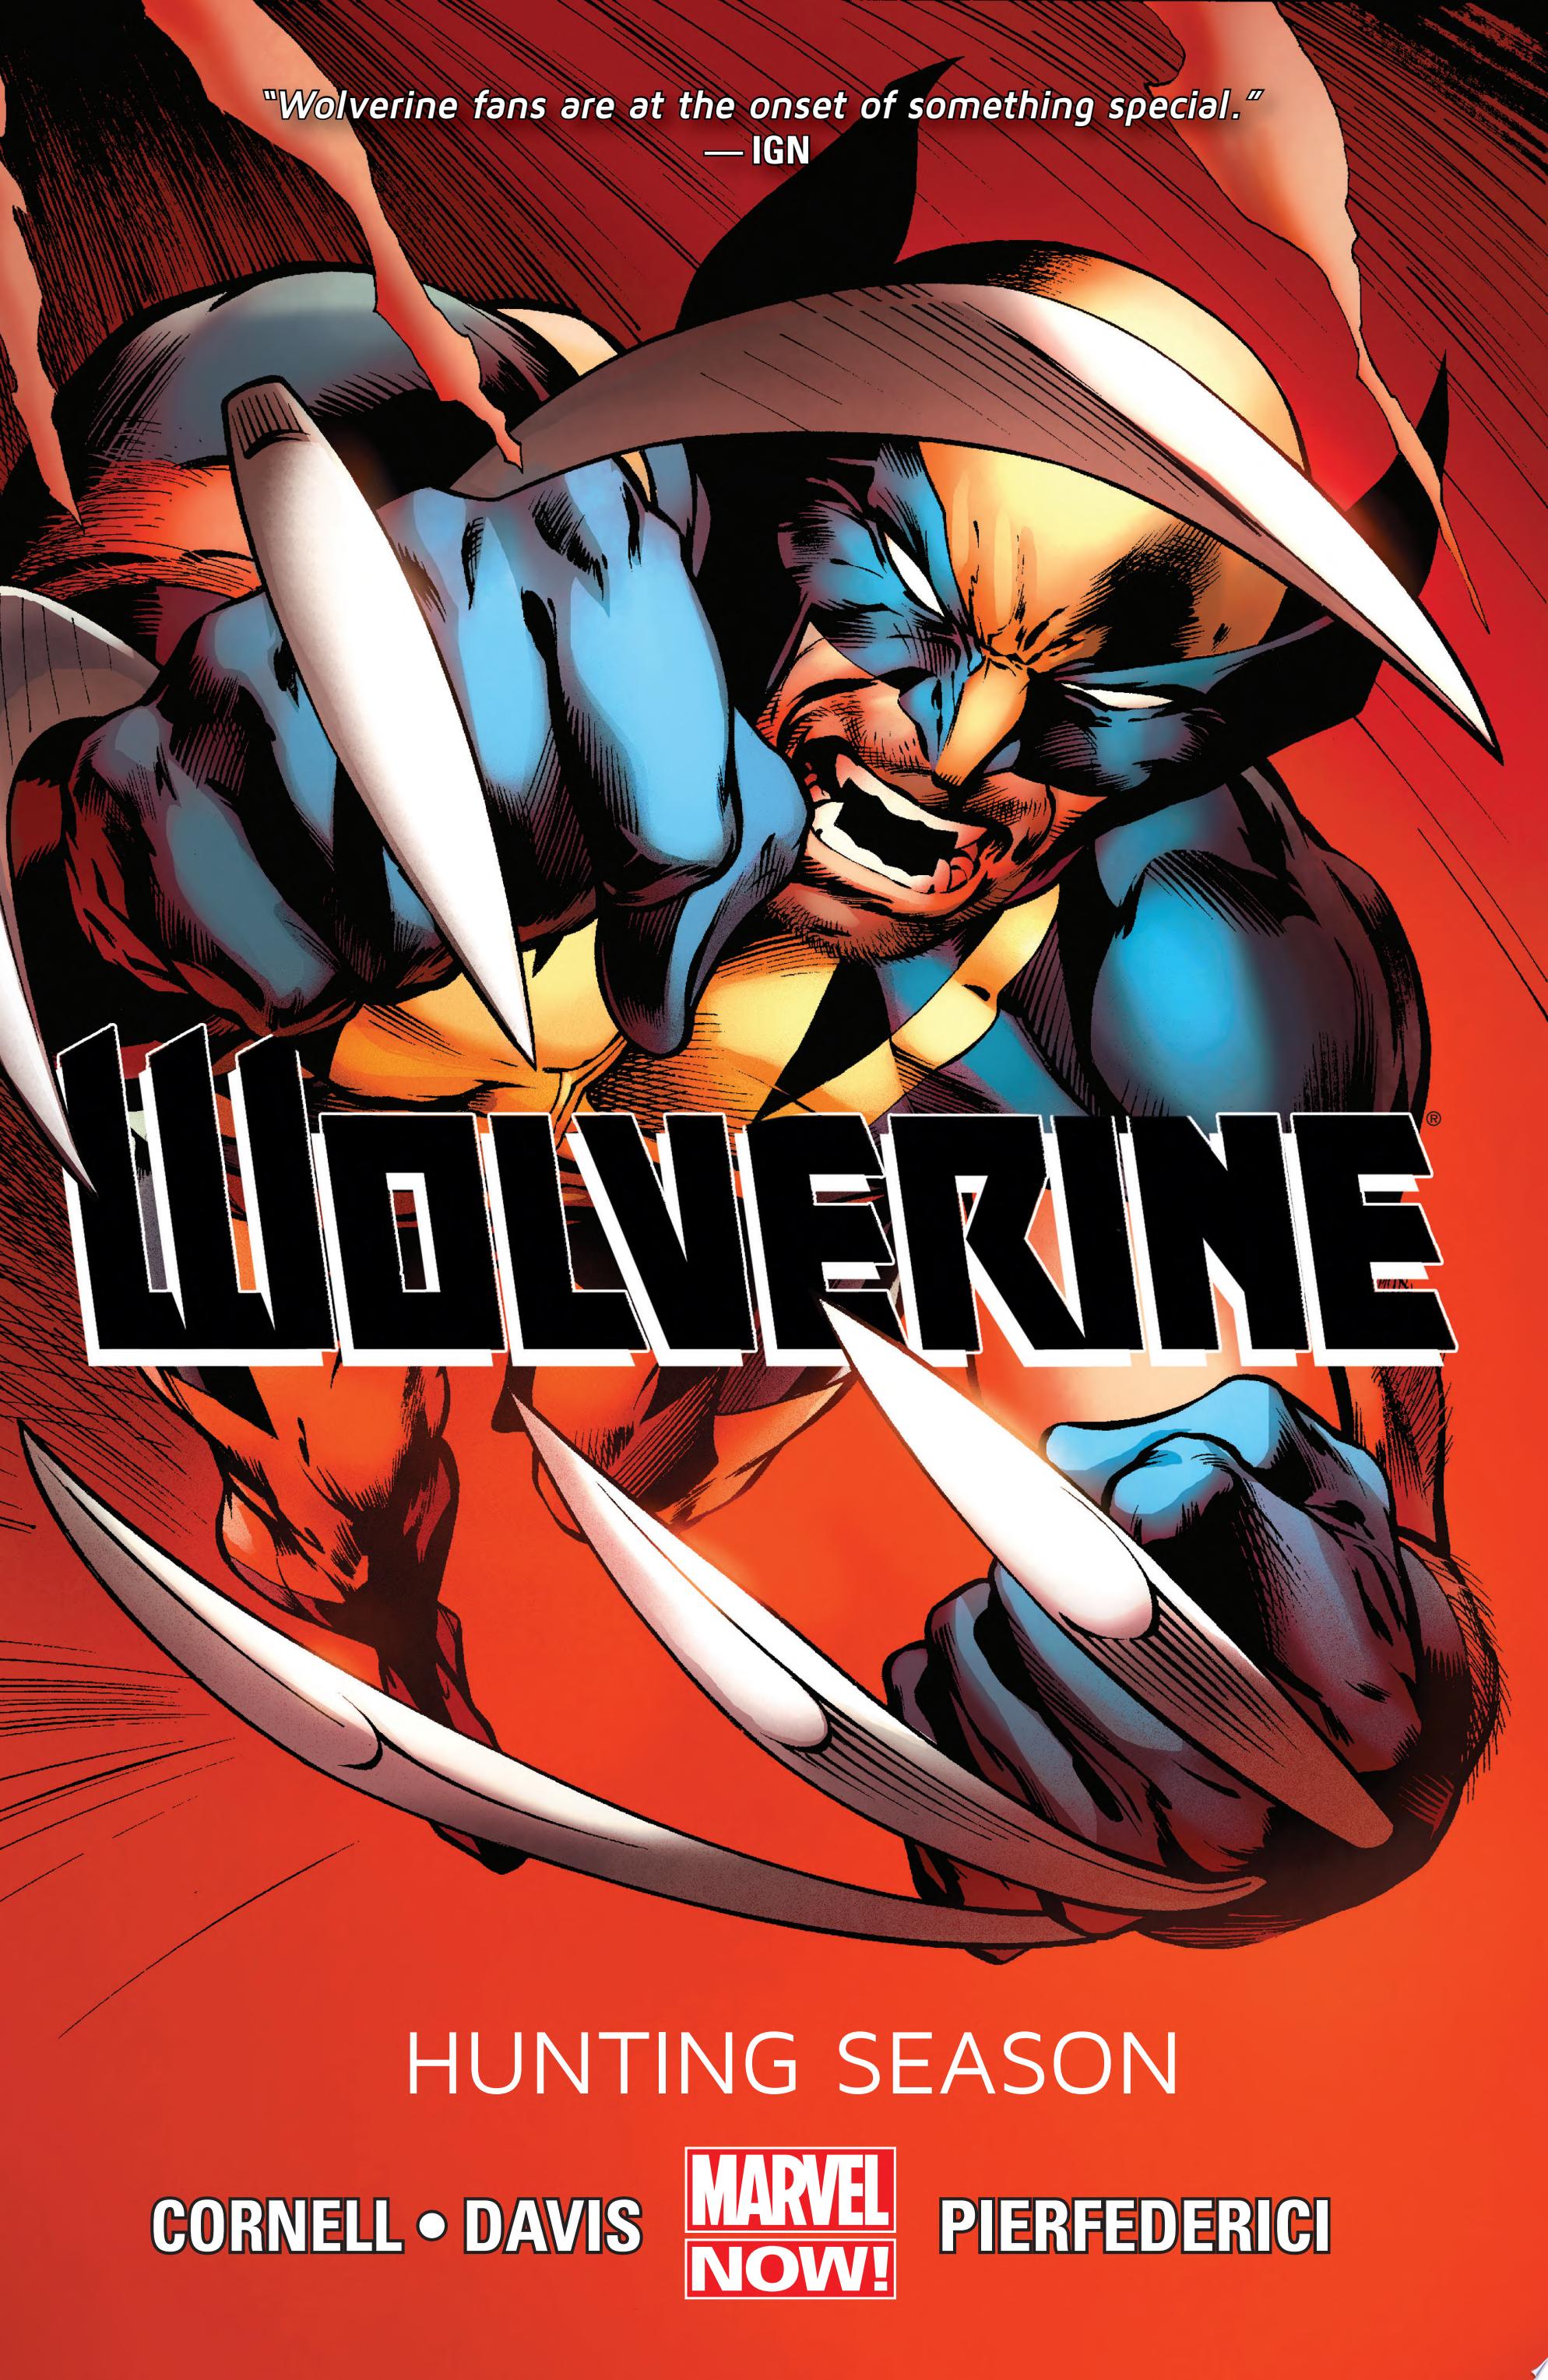 Image for "Wolverine Vol. 1"